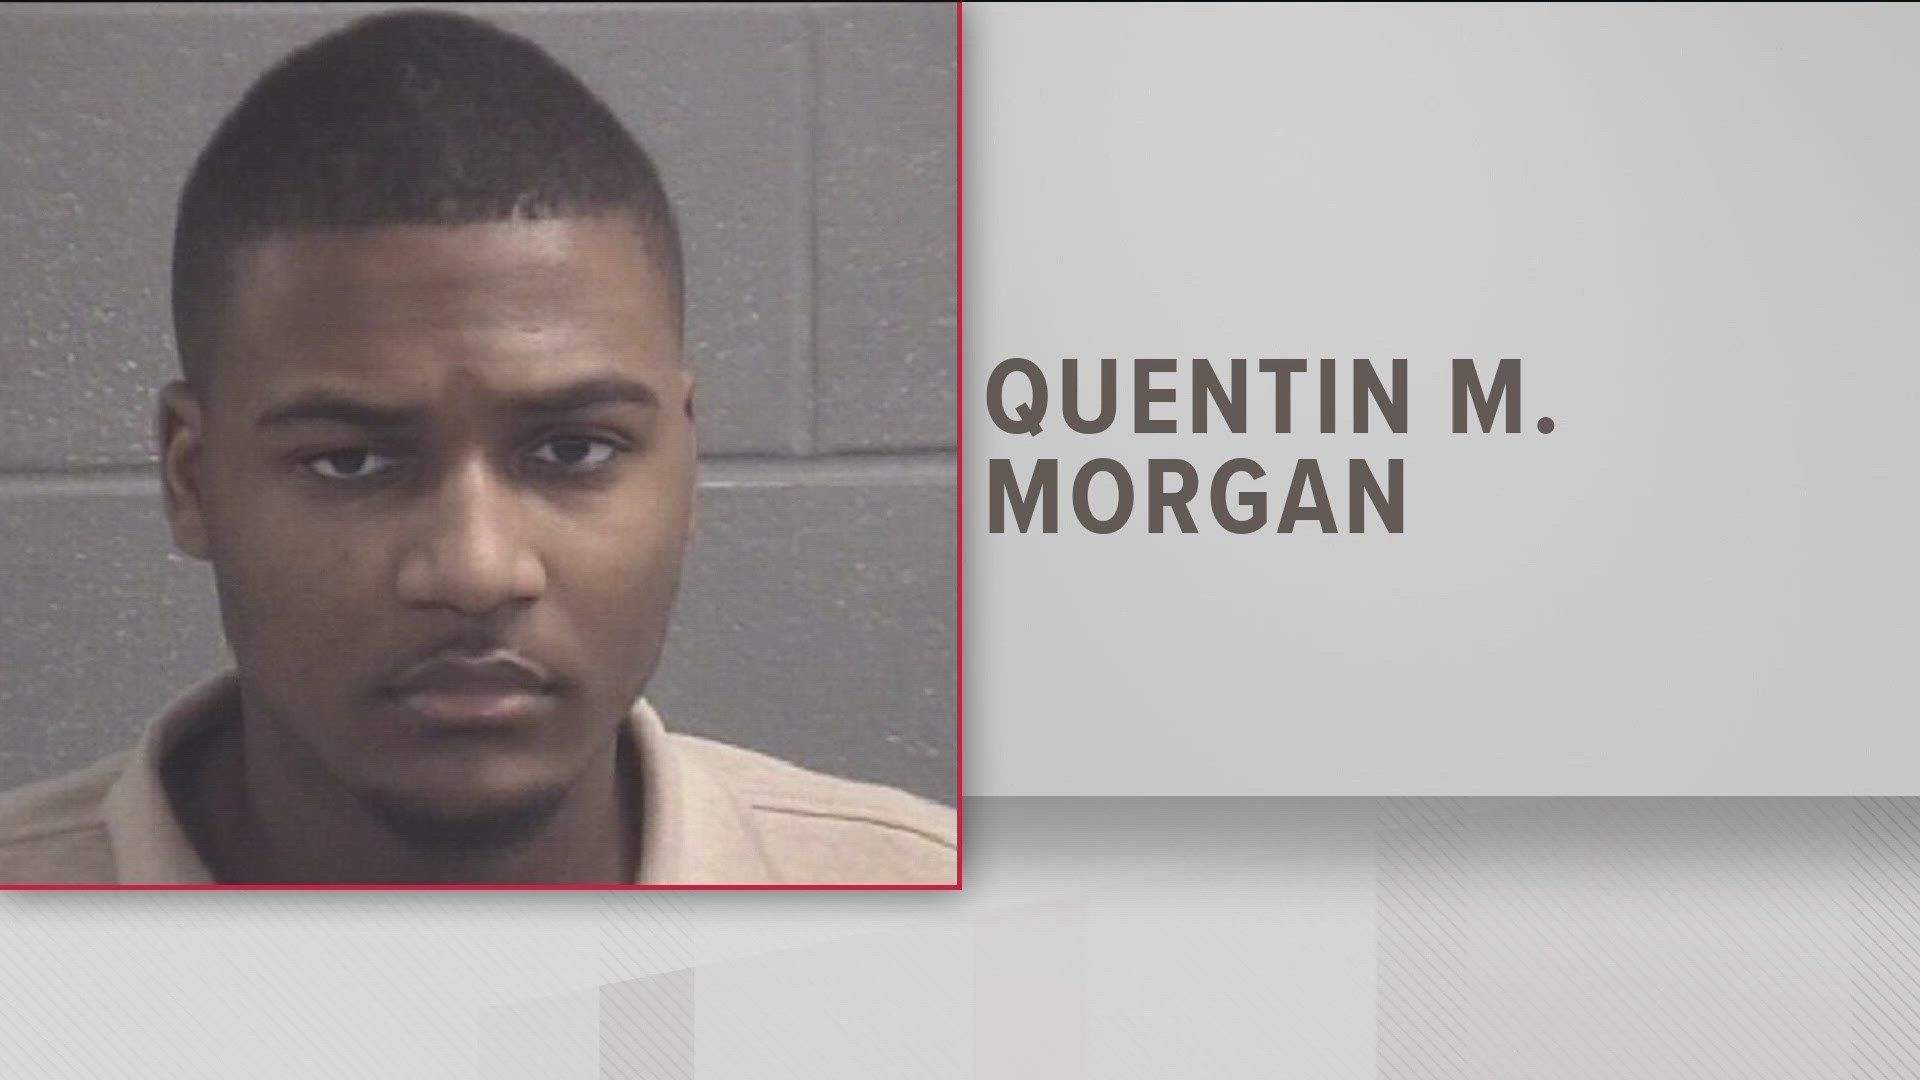 Quentin Morgan, 22, is charged with violation of oath of office, sexual assault and sodomy, the sheriff's office said.